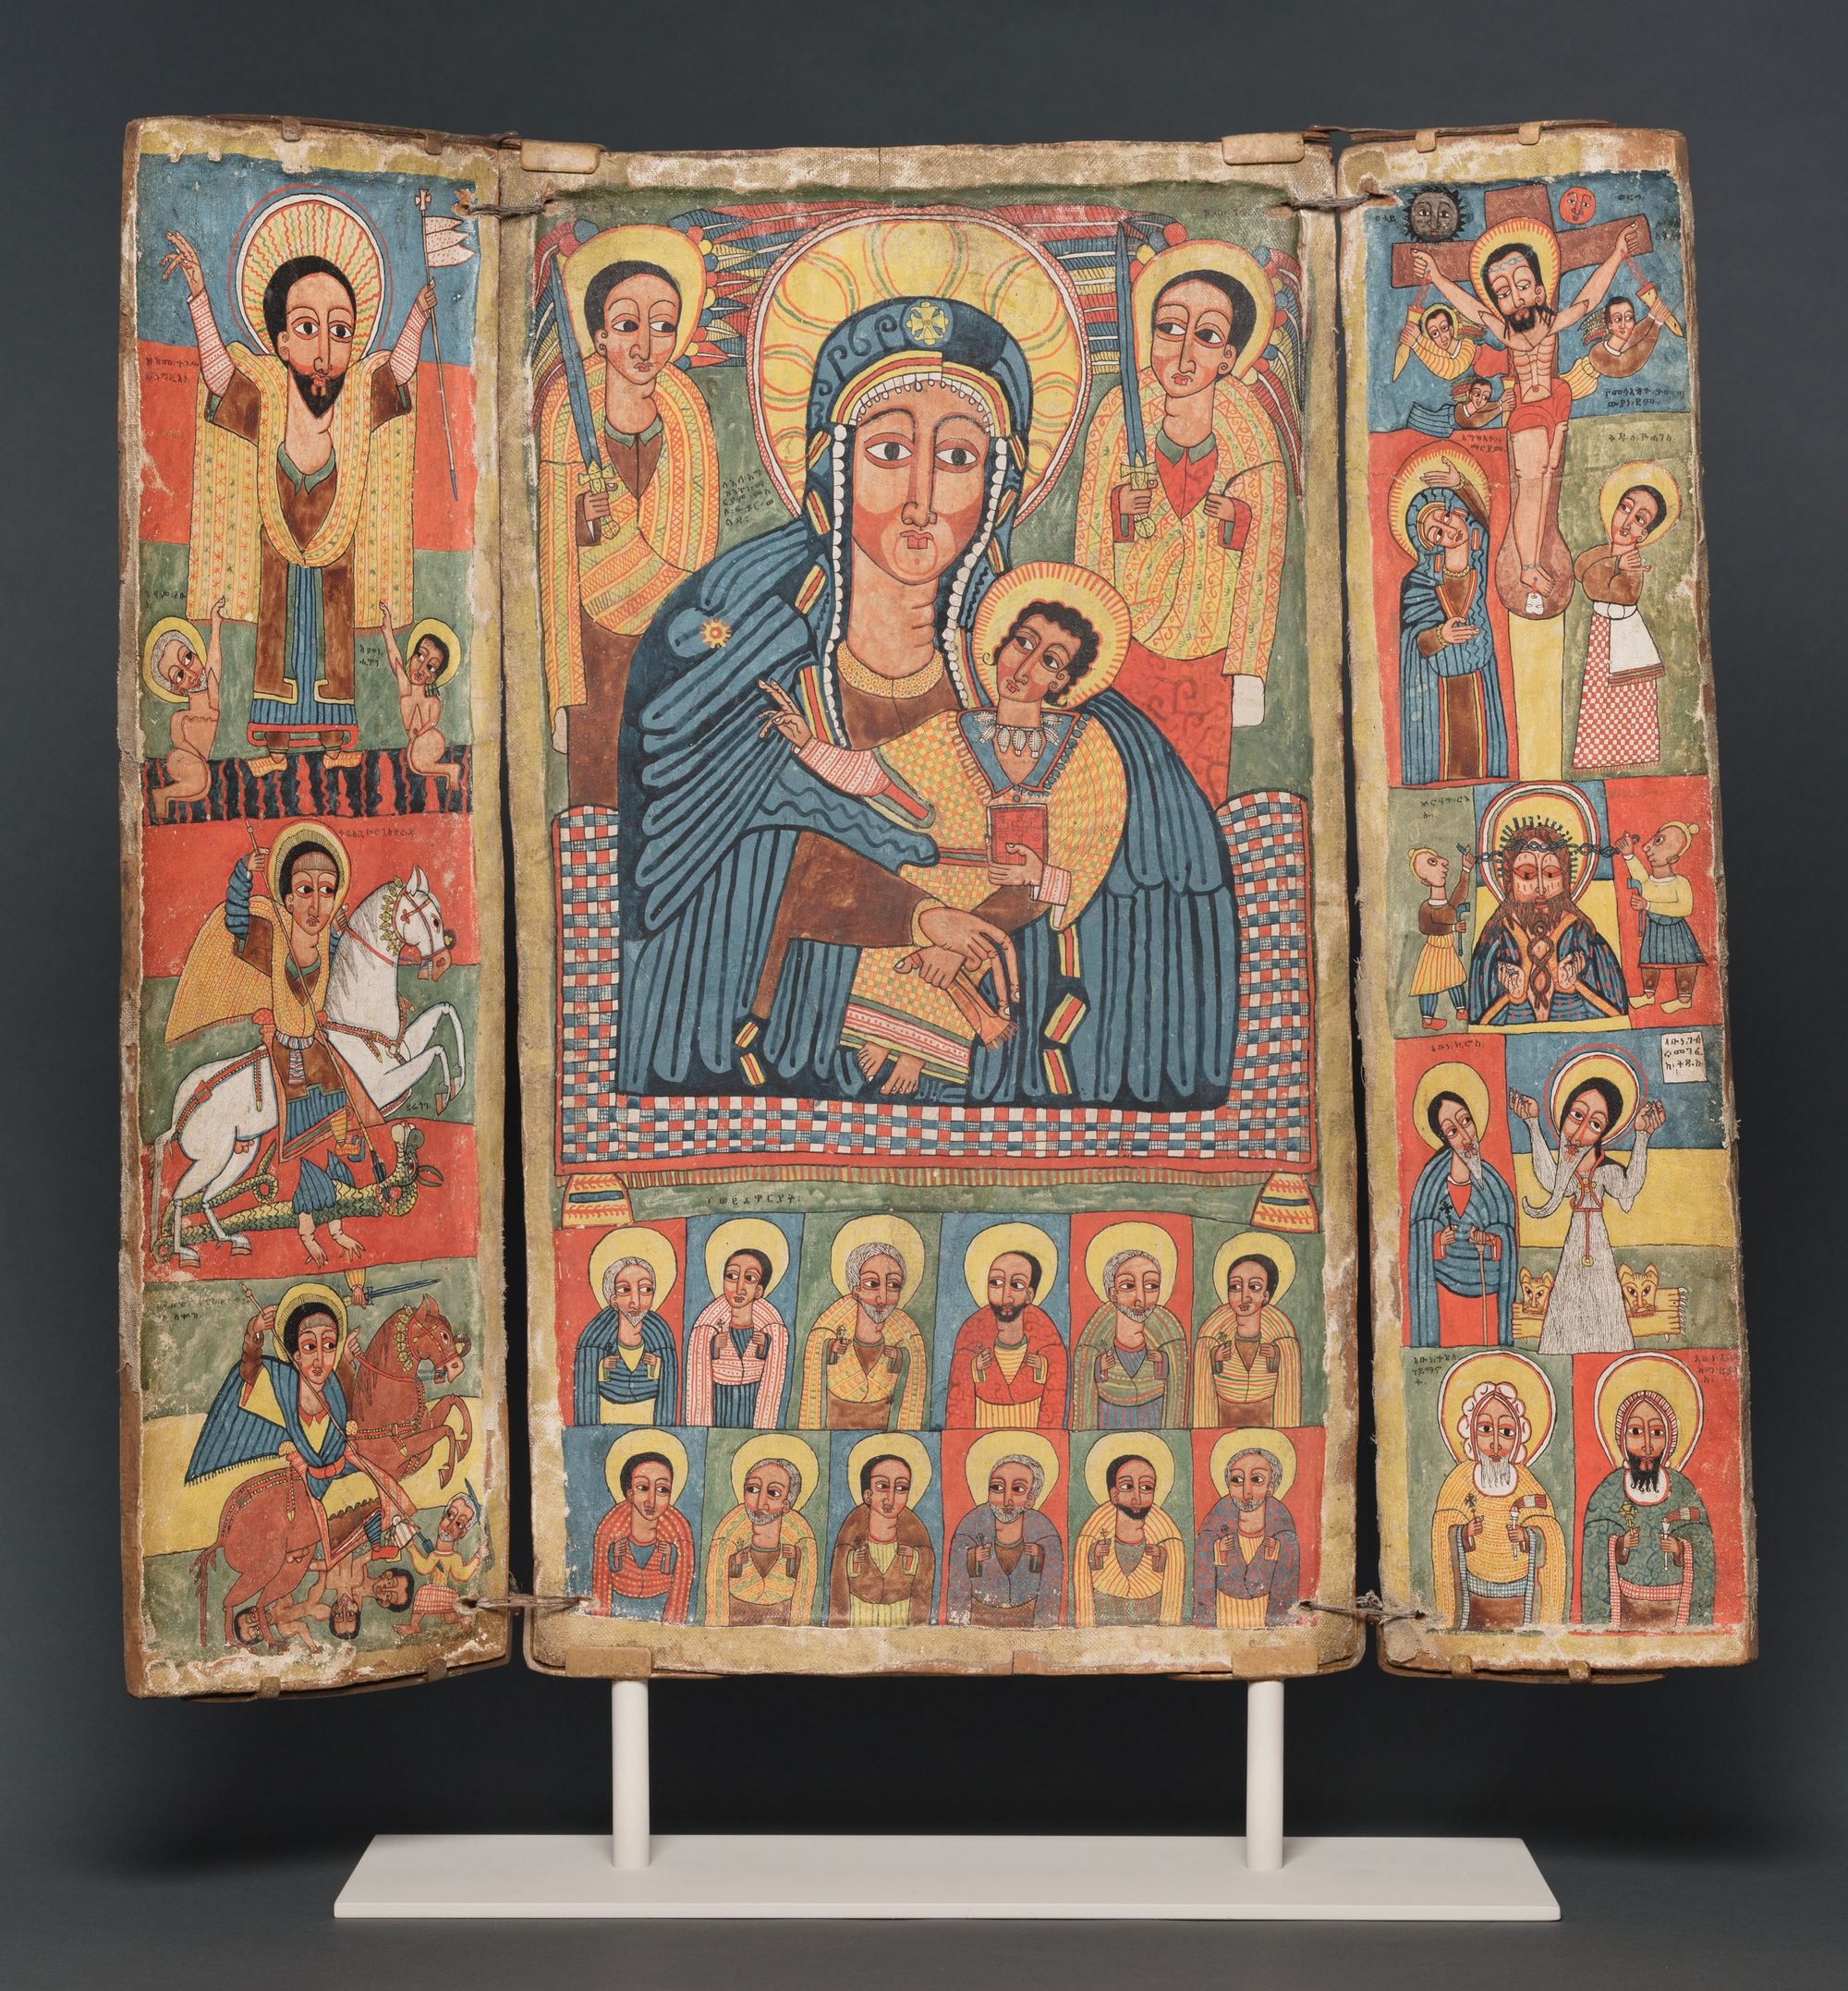 Virgin Mary, Child Jesus with Archangels Gabriel and Michael (late 17th century) Central Ethiopia - Public Domain Orthodox Painting